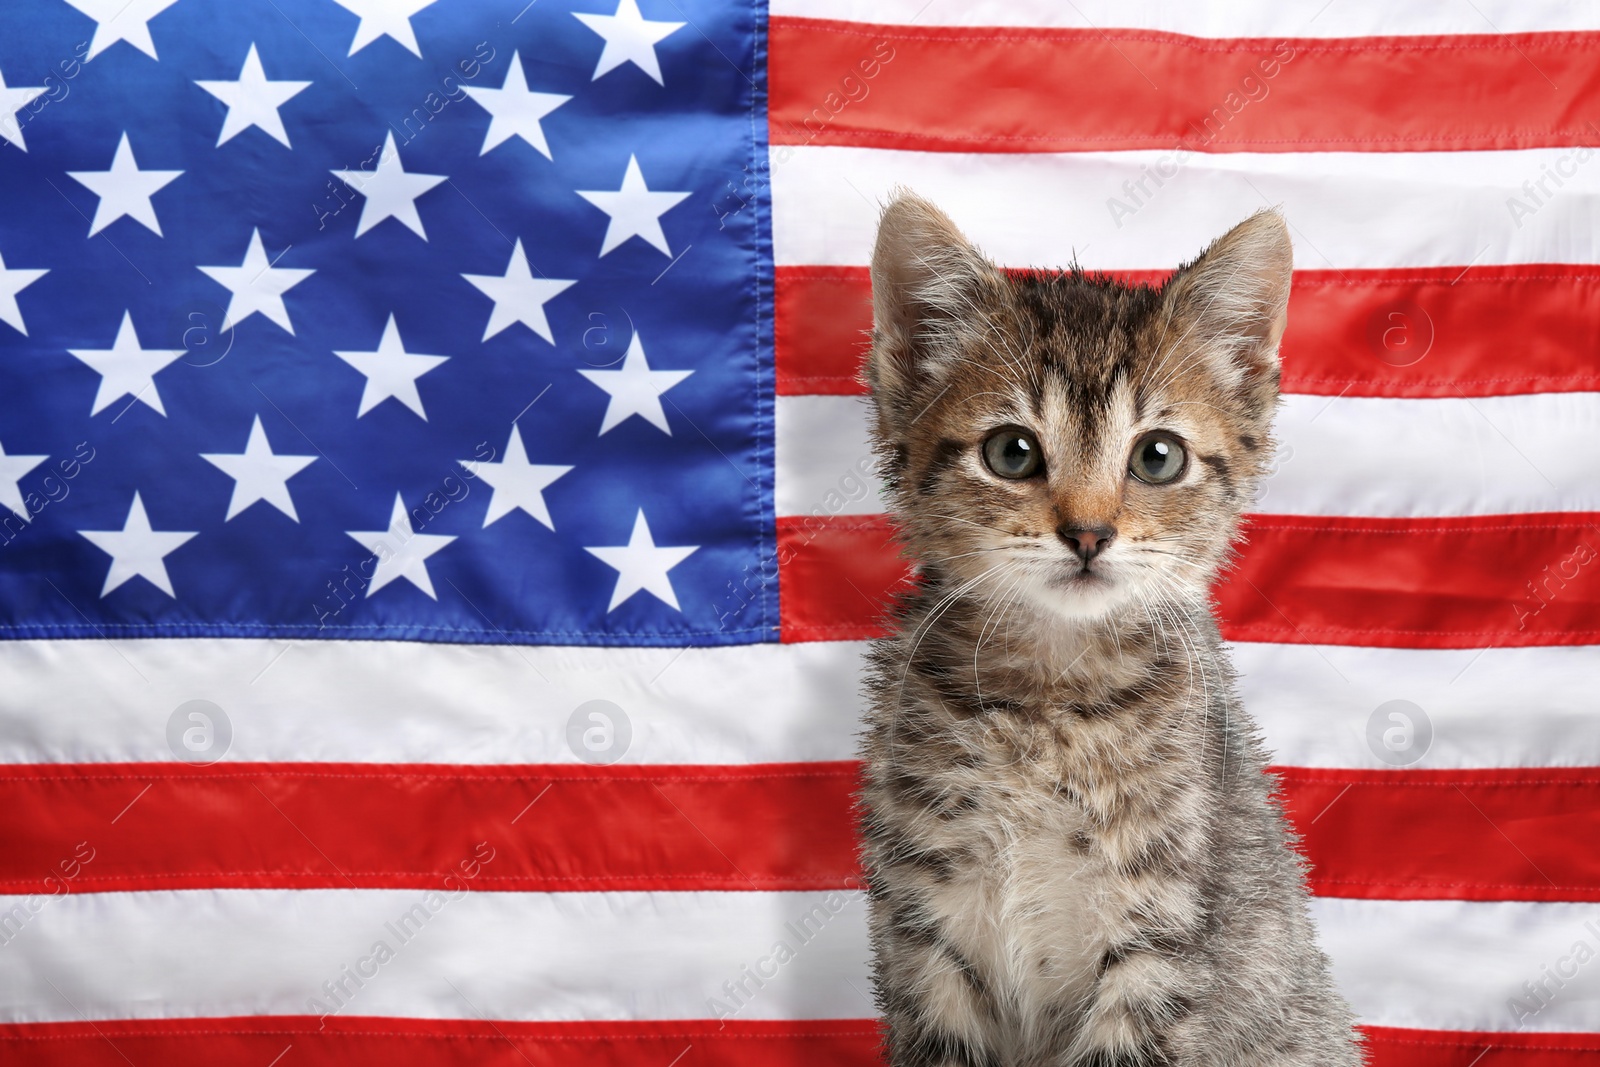 Image of Cute little kitten against national flag of United States of America